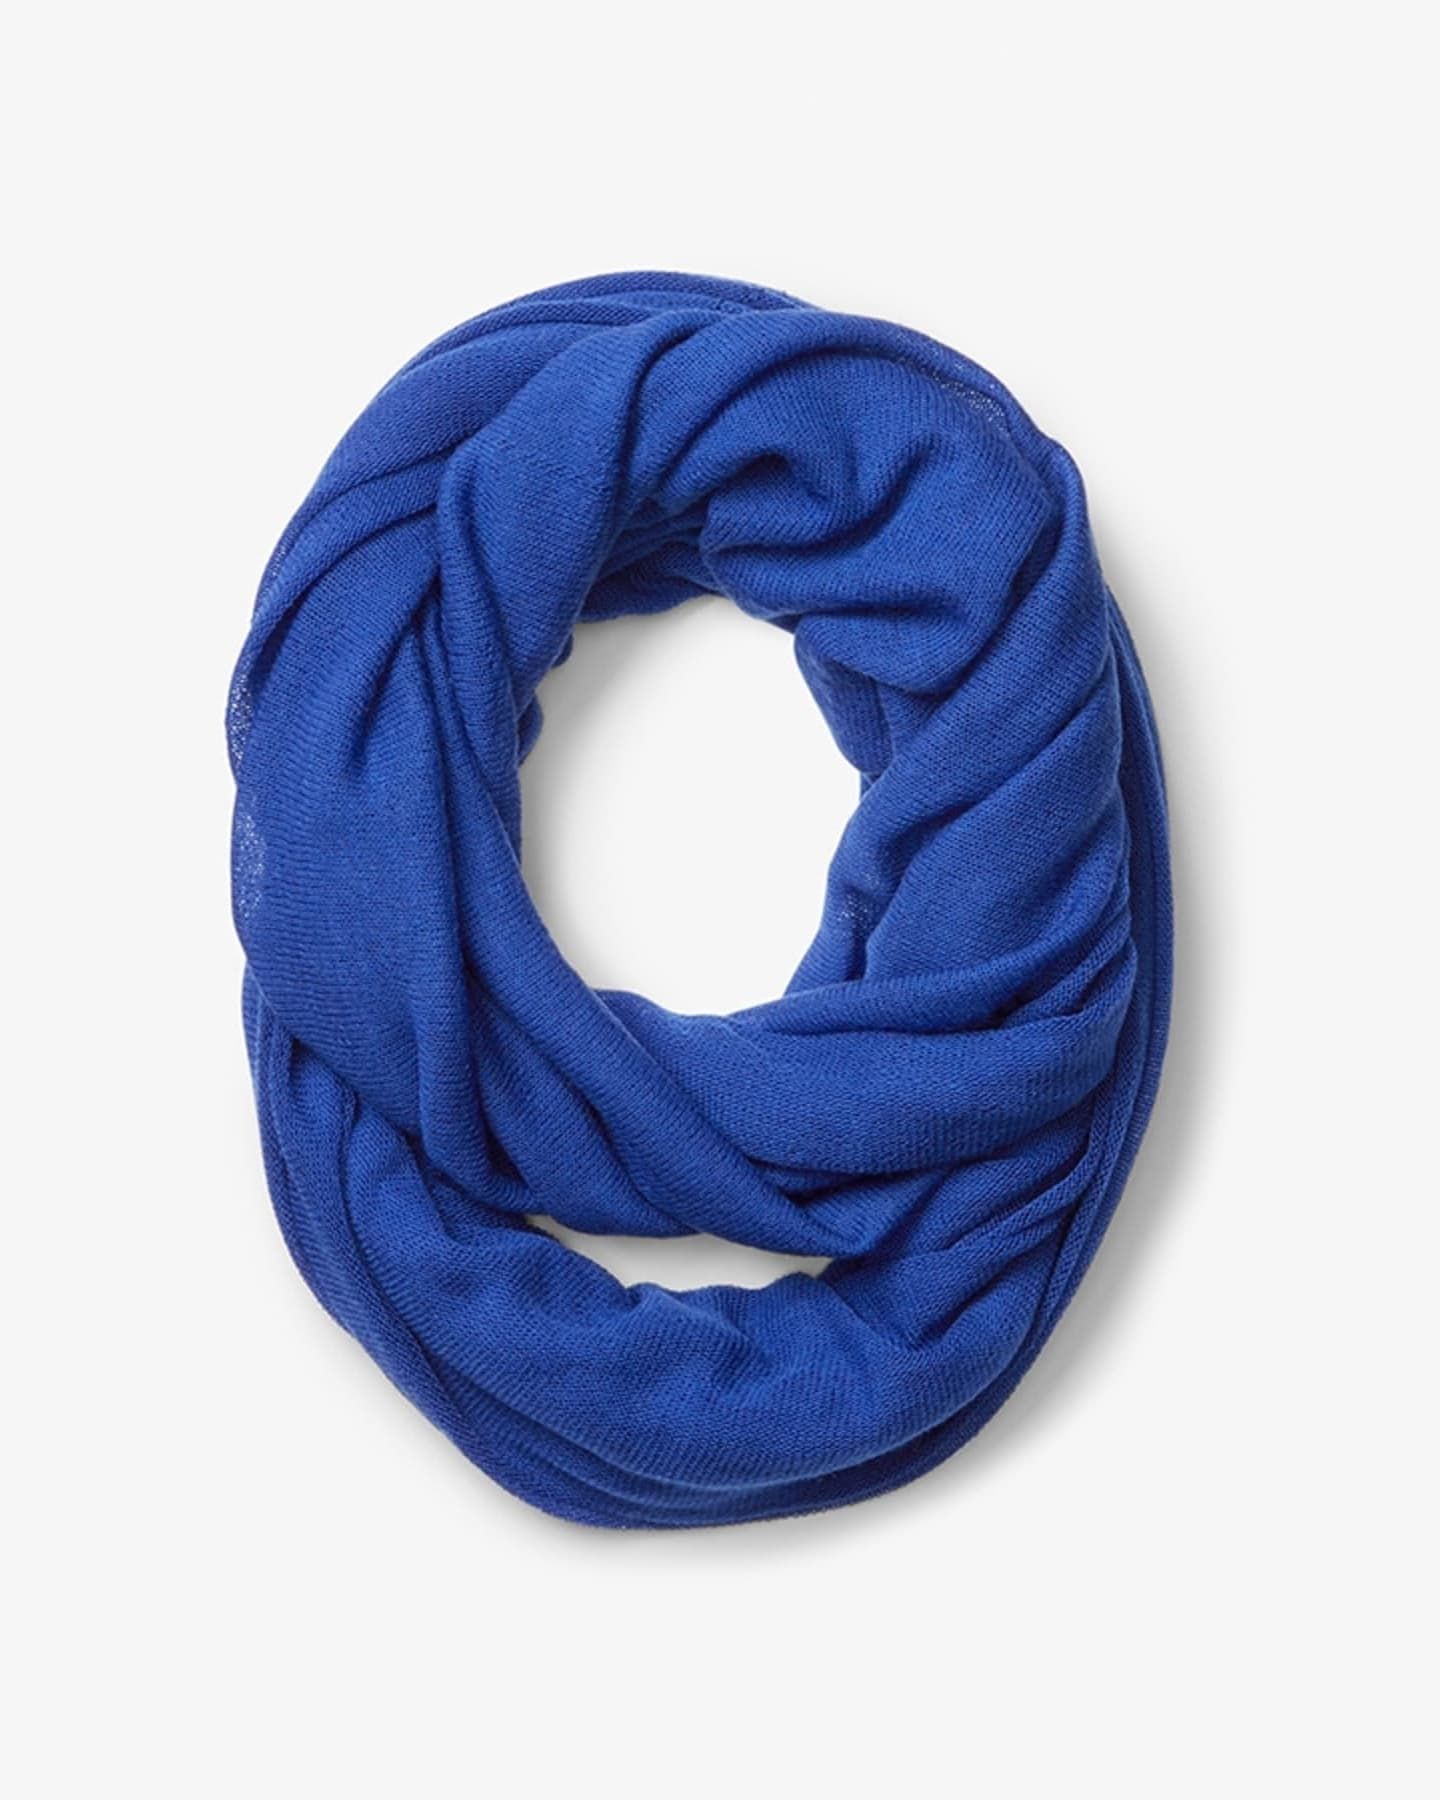 The Infinity Scarf | MM LaFleur